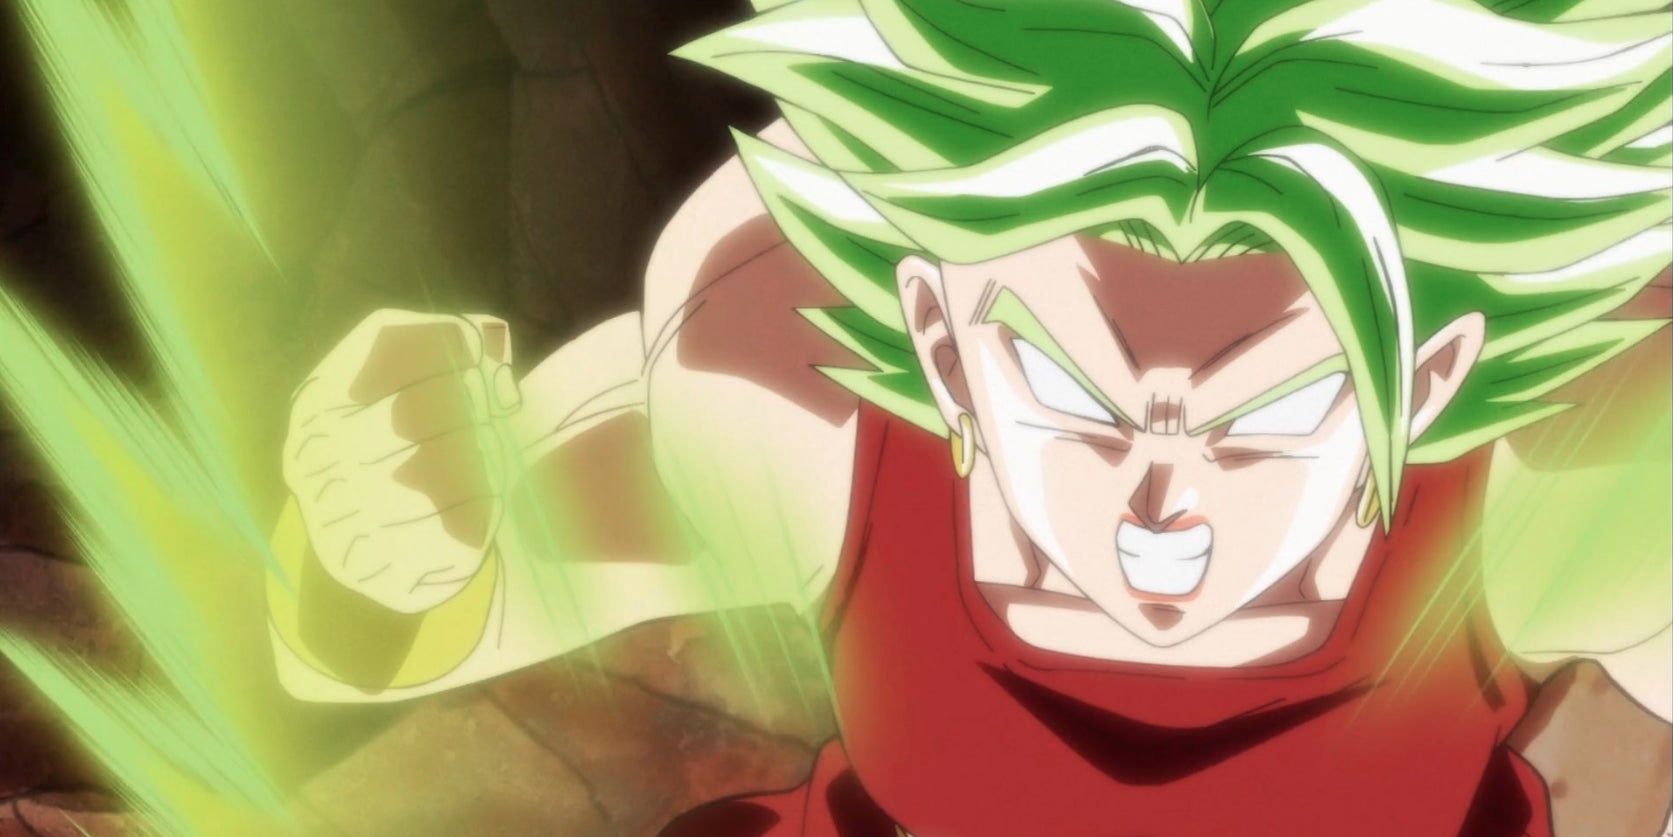 Kale gets angry in her Berserker Super Saiyan state in Dragon Ball Super